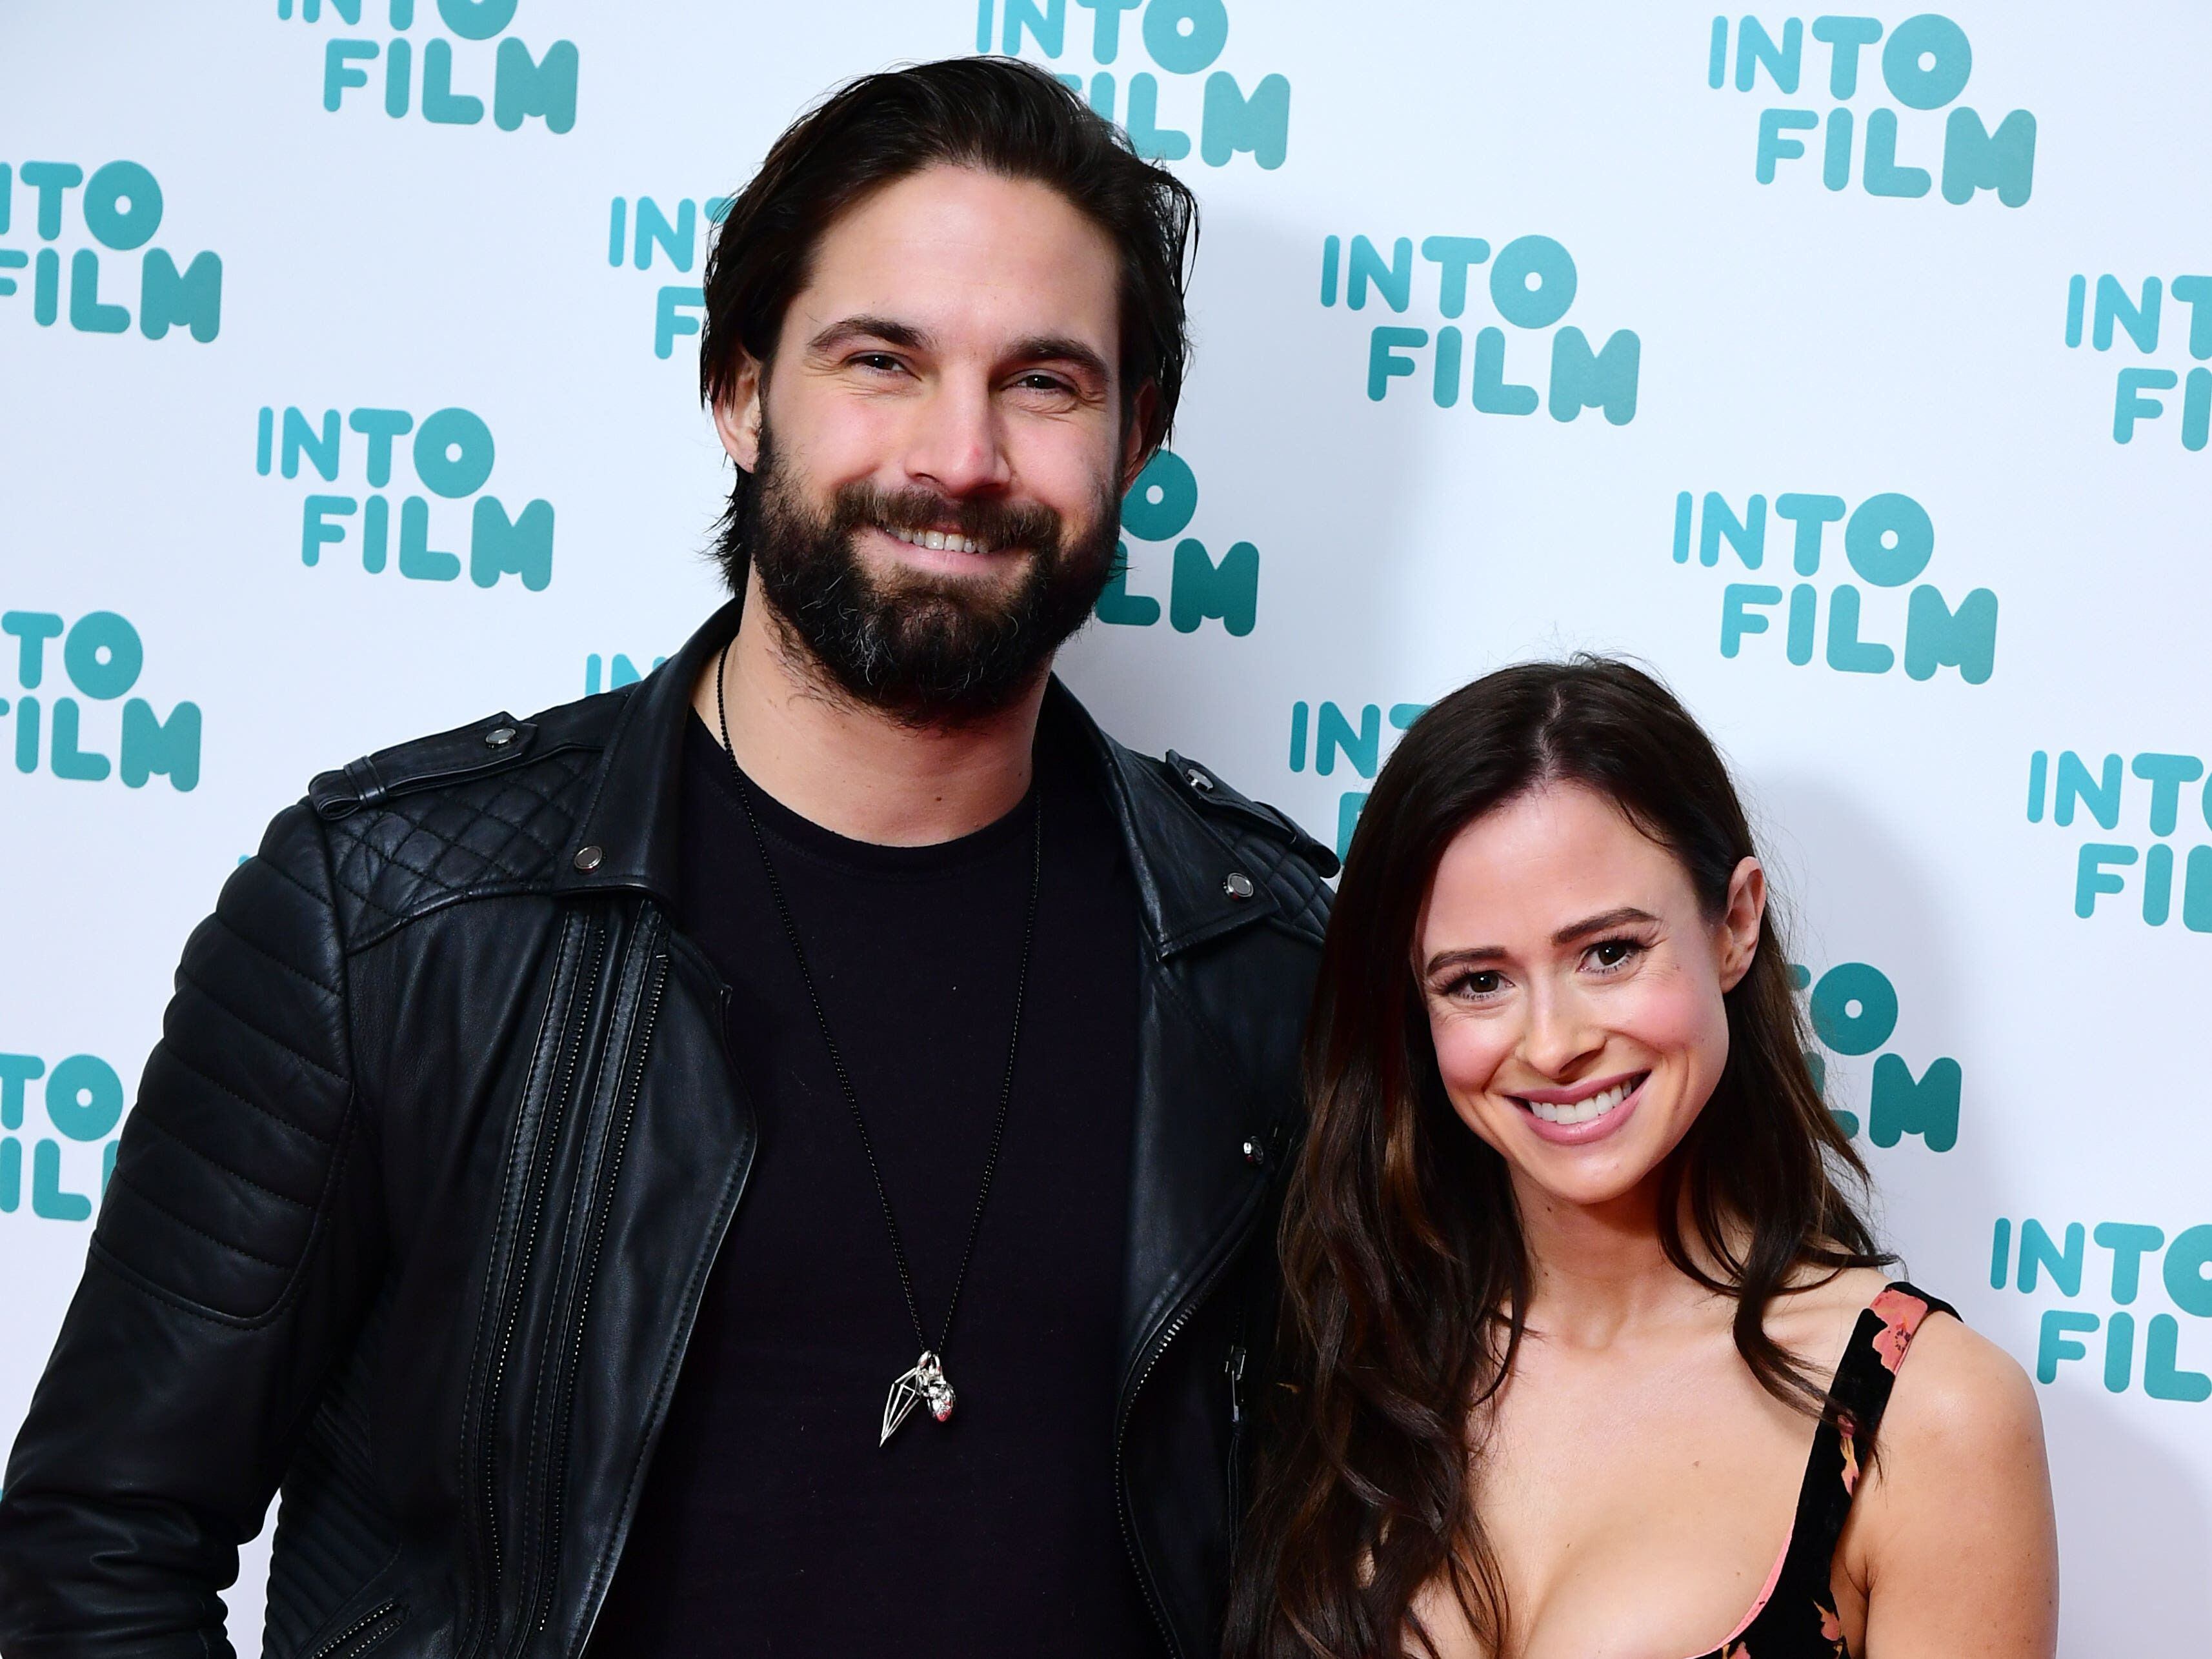 Former Love Islanders Jamie Jewitt and Camilla Thurlow welcome second child